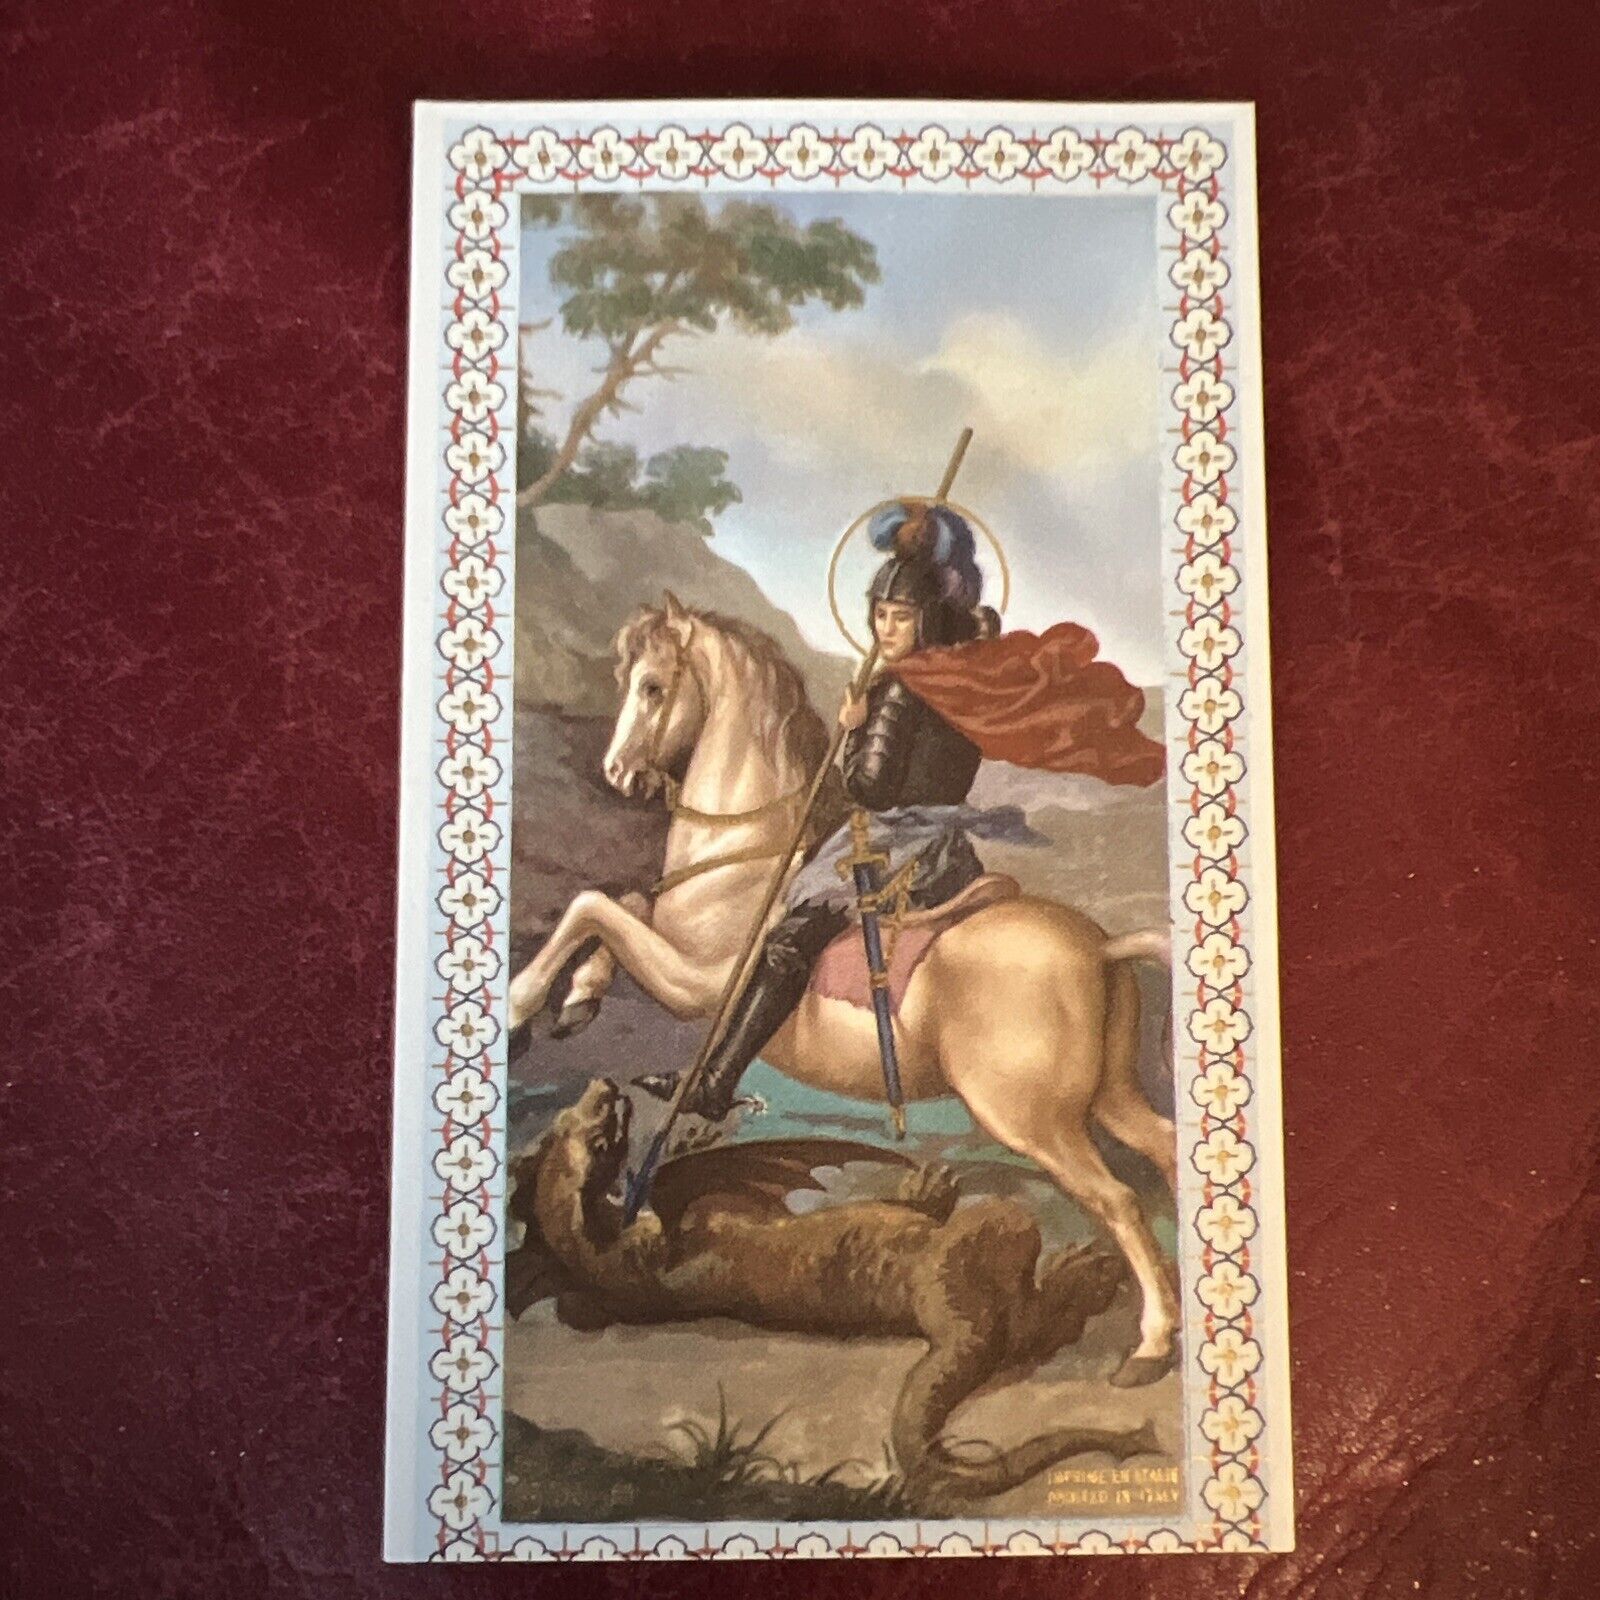 Vintage Catholic Holy Card - St. George And The Dragon